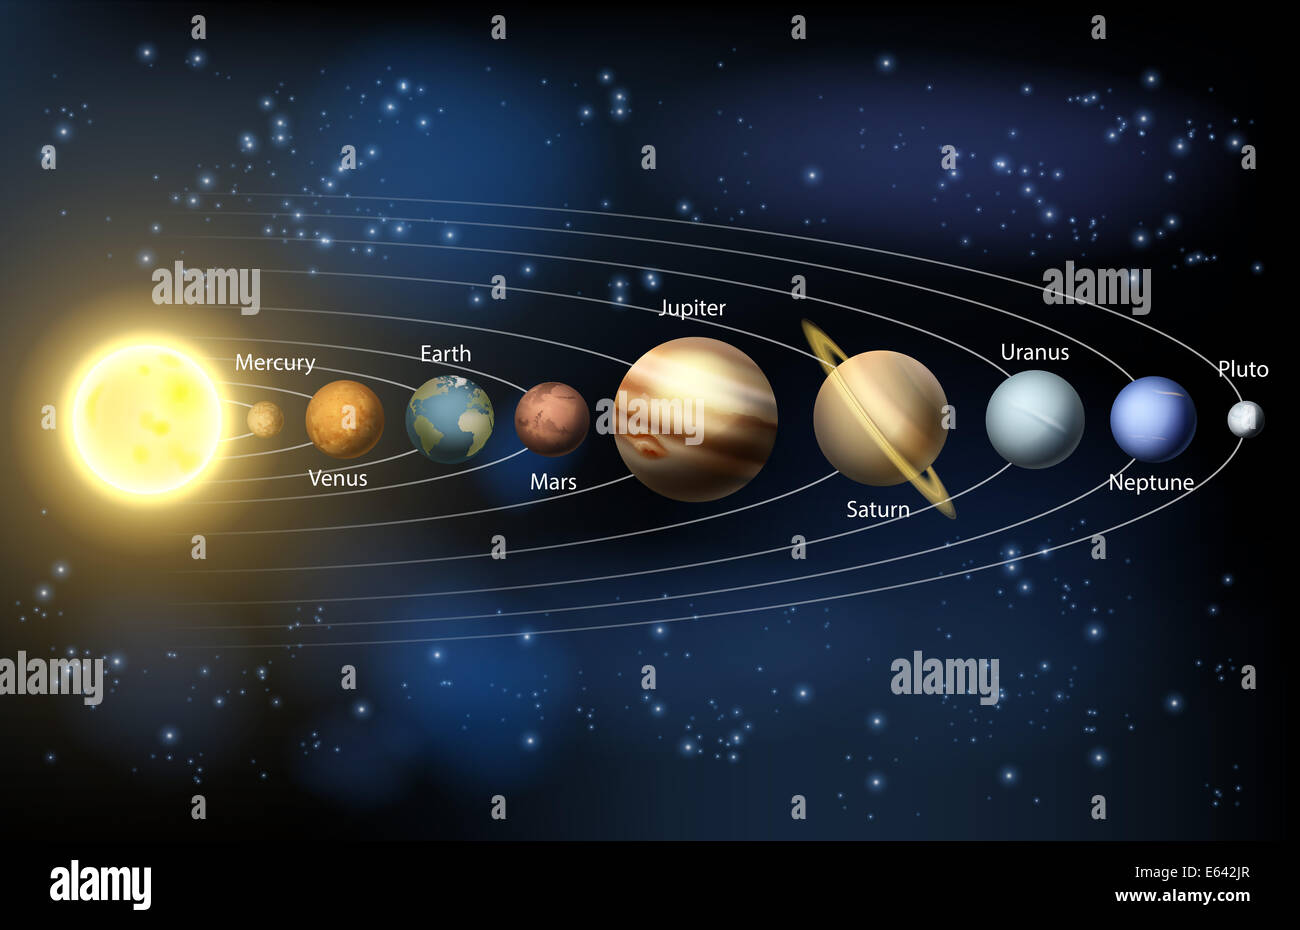 An illustration of the planets of our solar system. Stock Photo